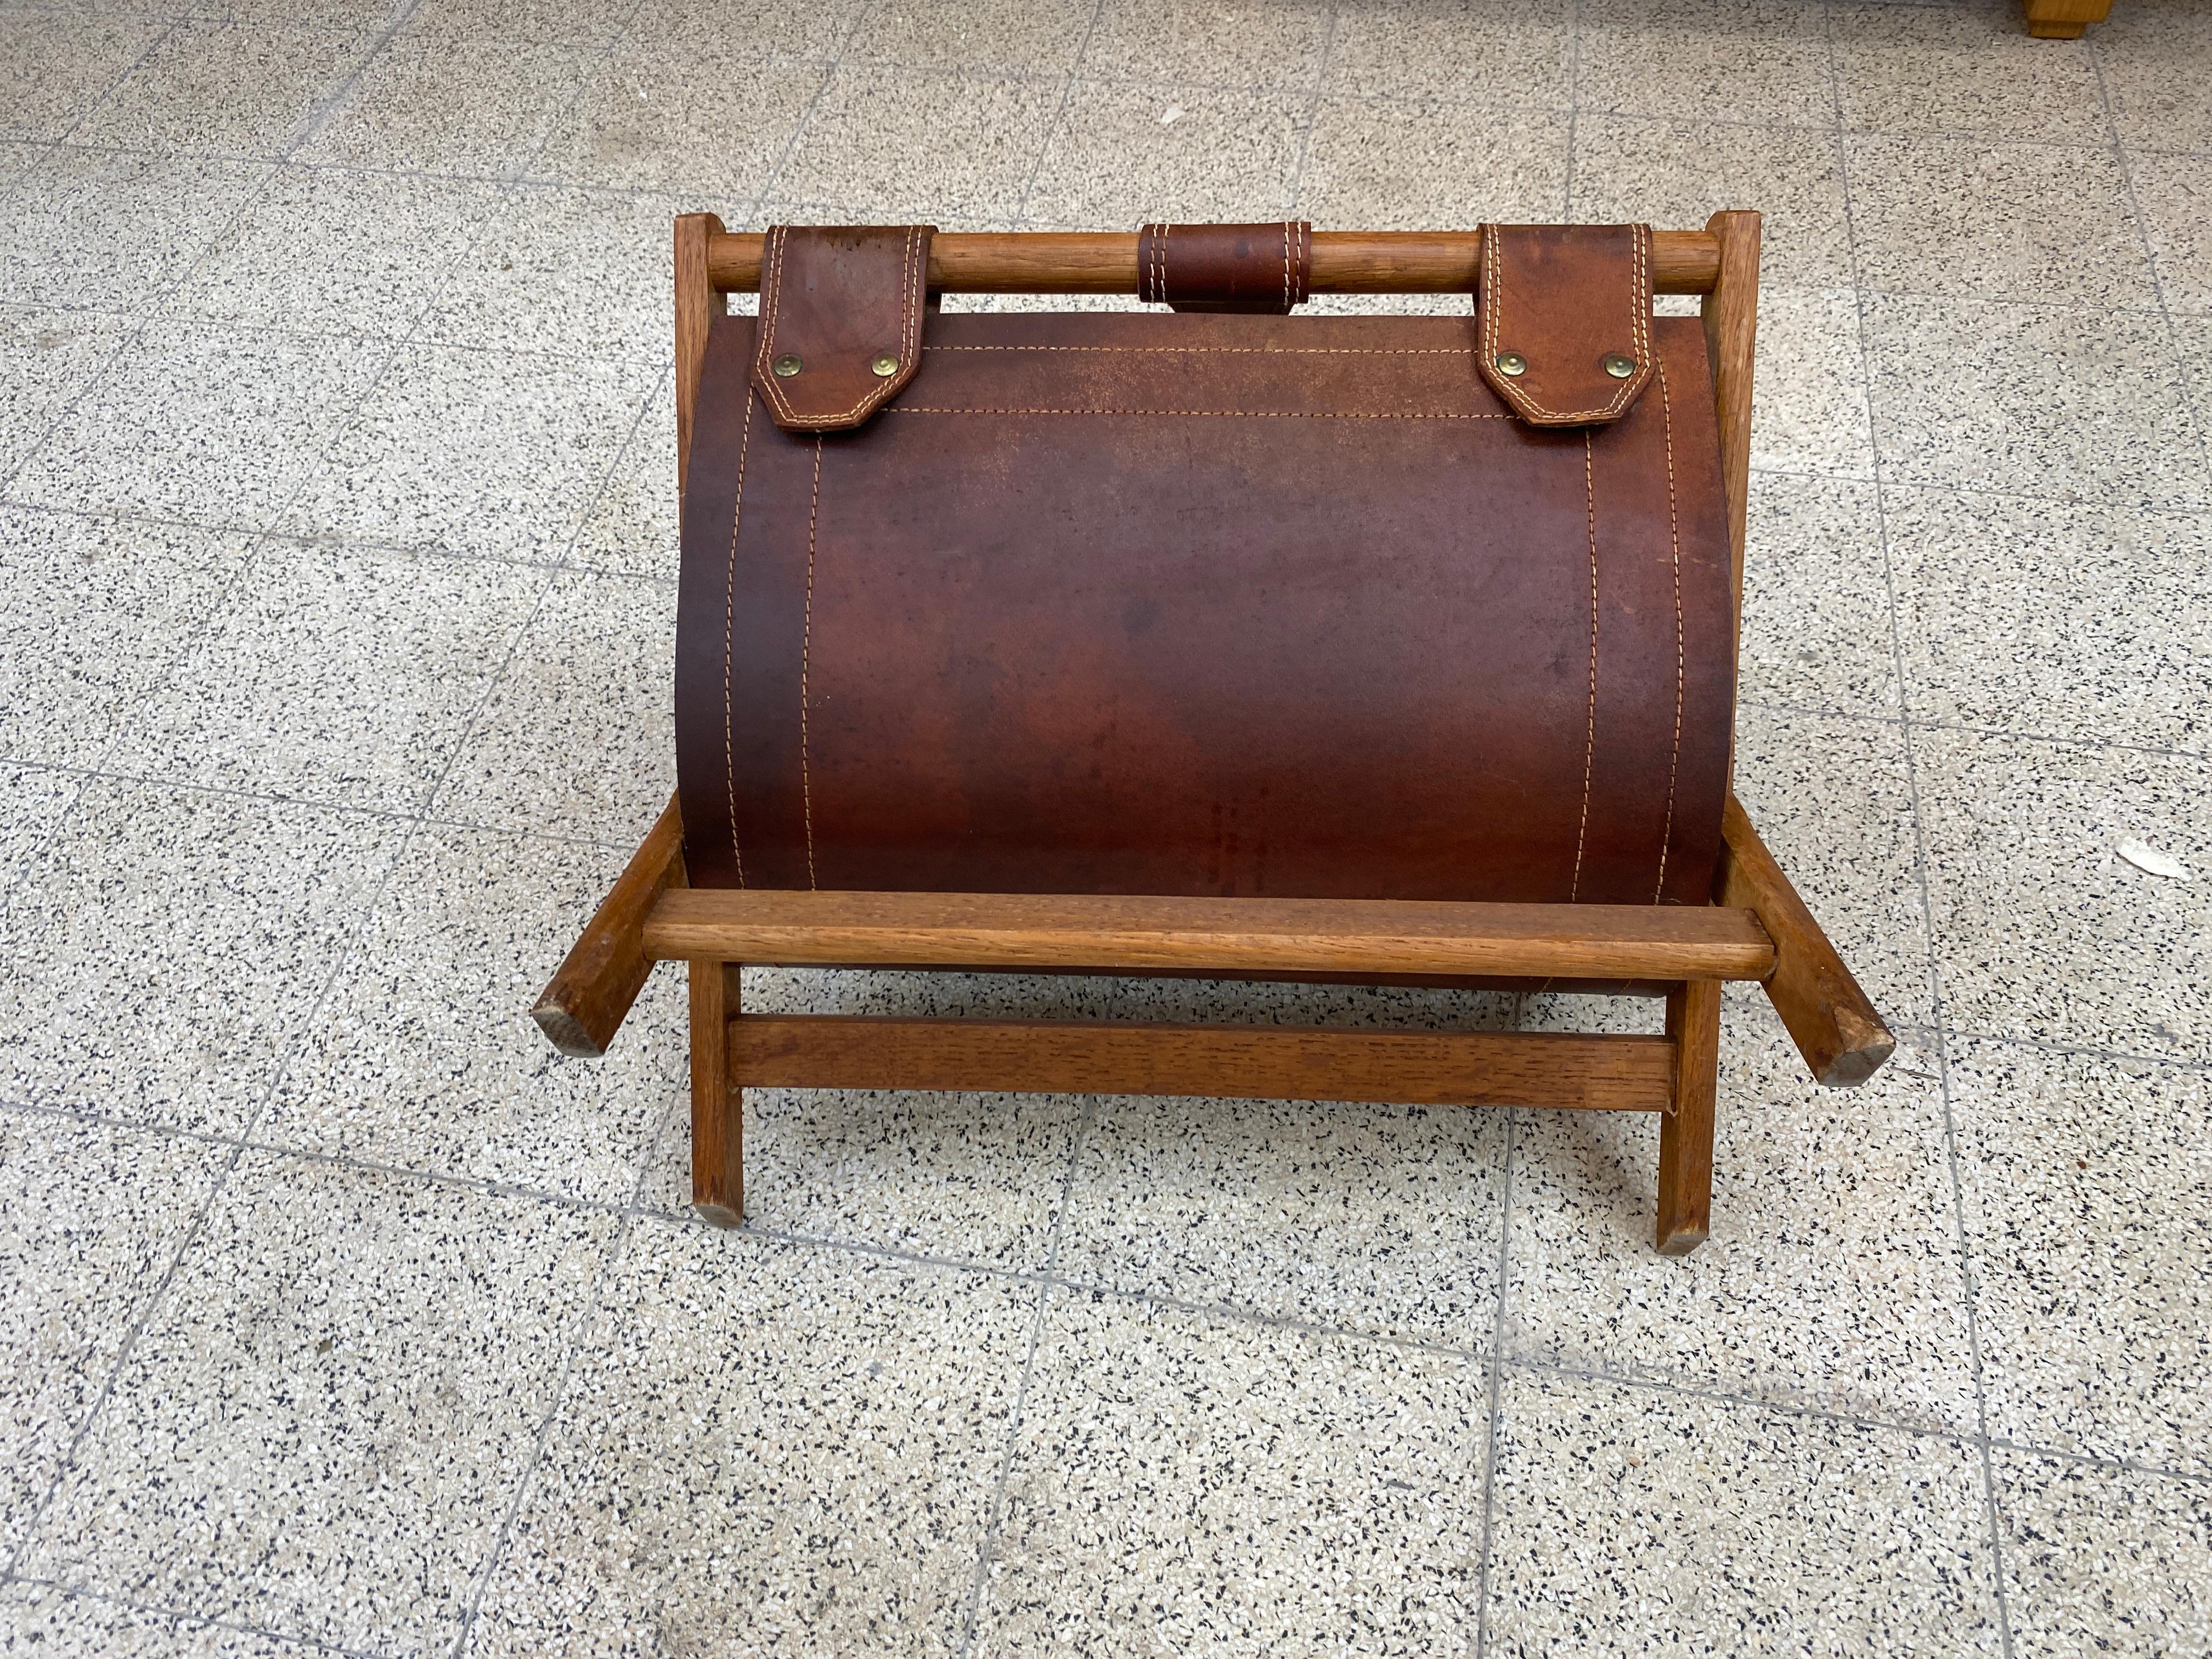 Mid-Century Modern Magazine Rack in Oak and Leather, circa 1950-1960 For Sale